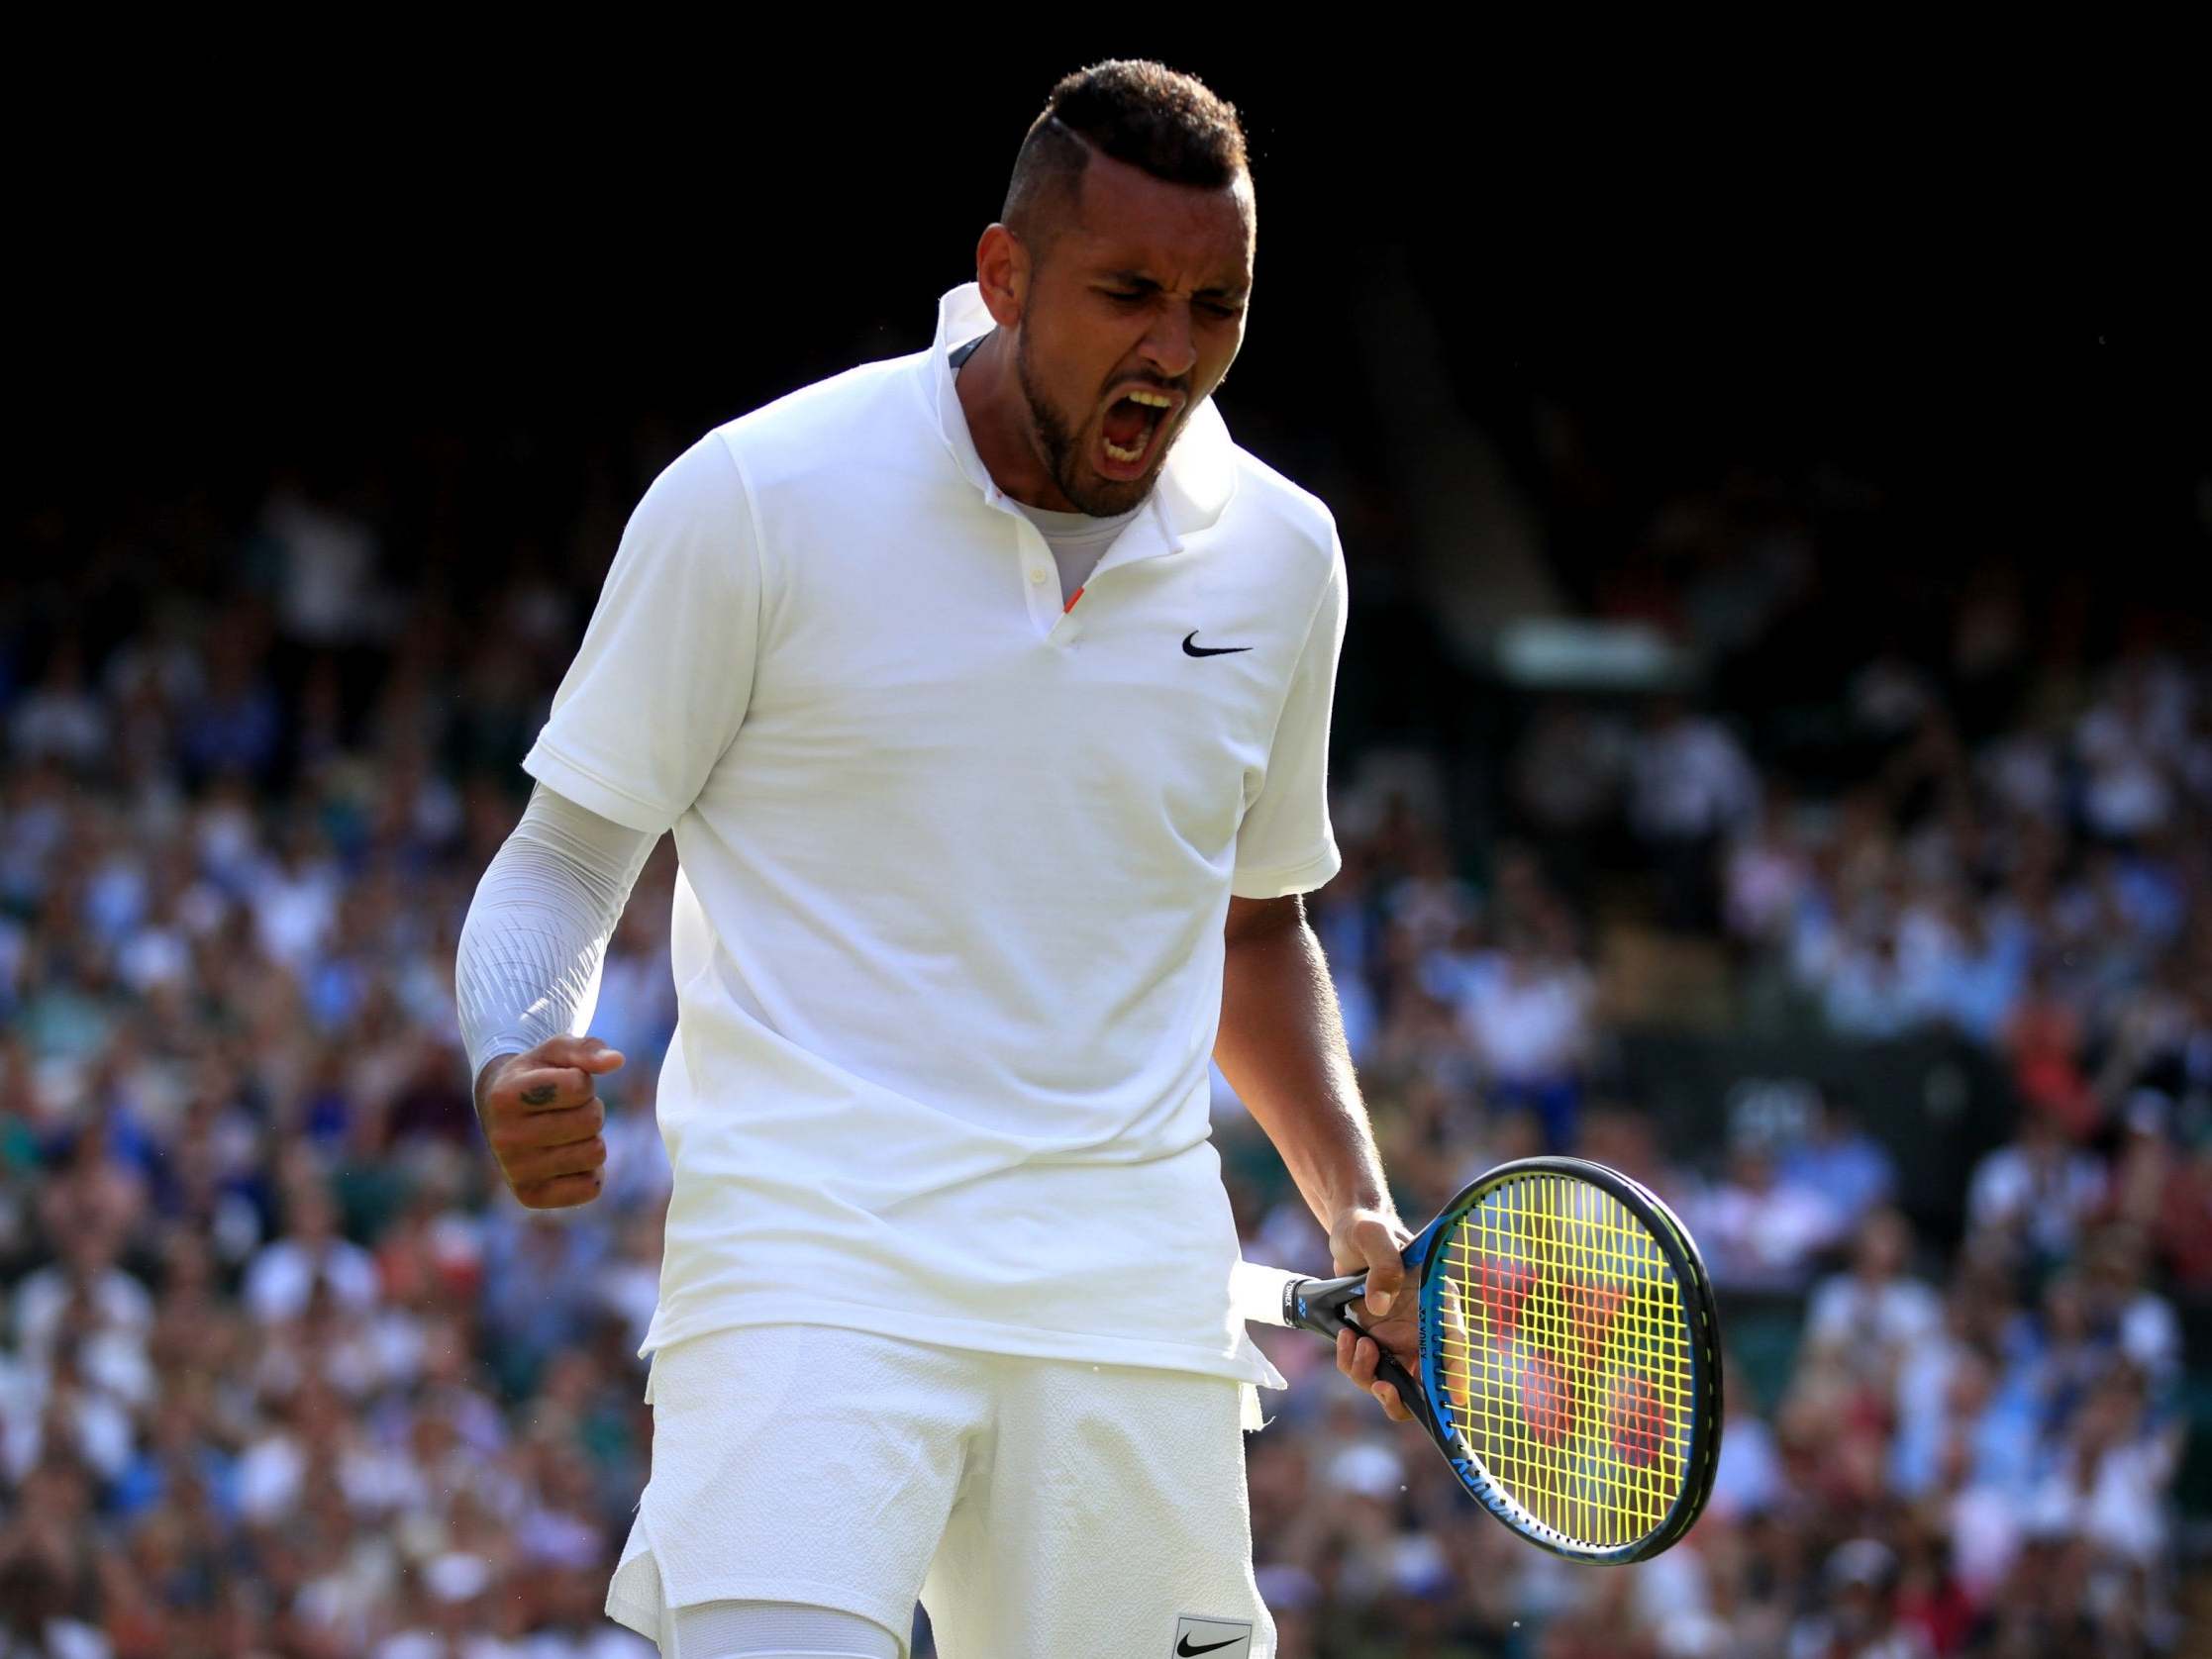 Wimbledon 2019 Watch Nick Kyrgios enrage Rafael Nadal with underarm serve during second-round match The Independent The Independent